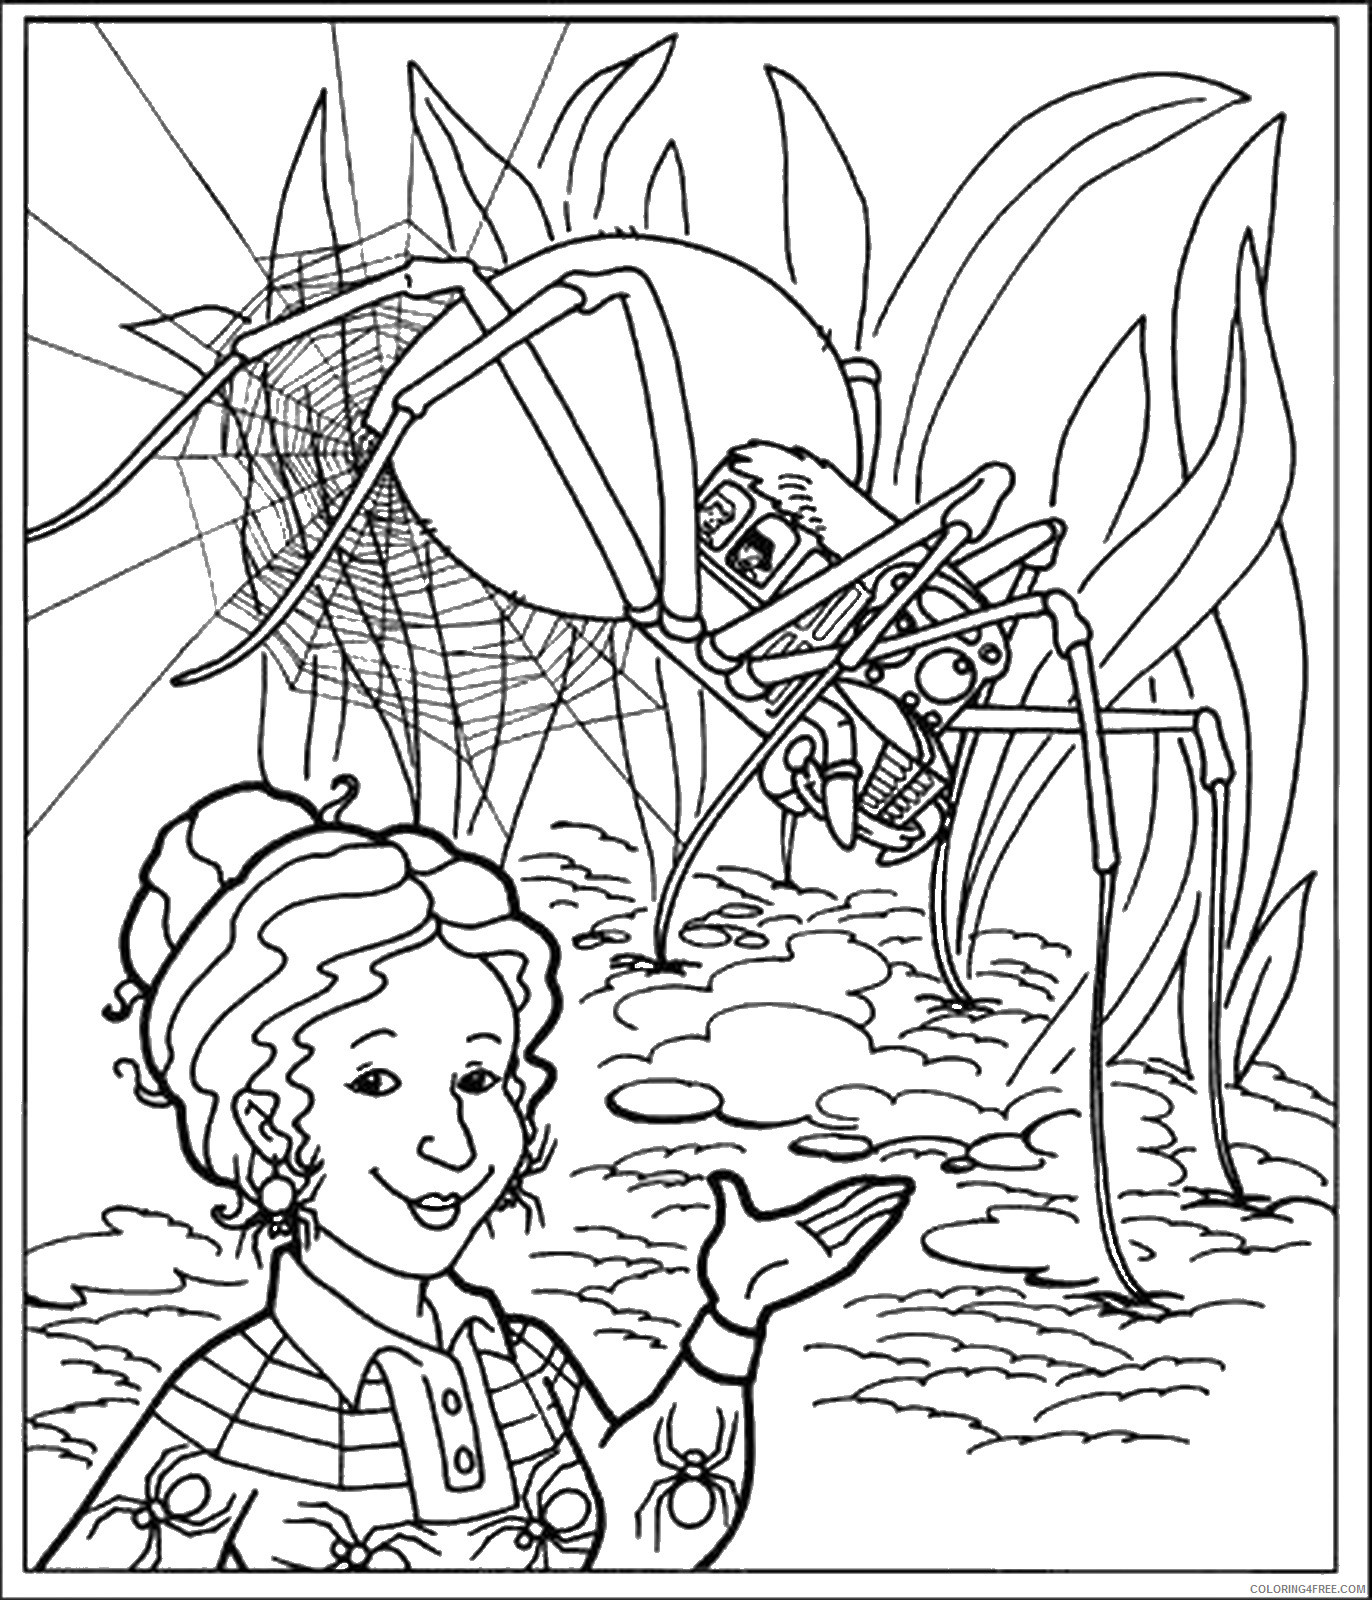 The Magic School Bus Coloring Pages Cartoons magic_school_bus_cl07 Printable 2020 6477 Coloring4free